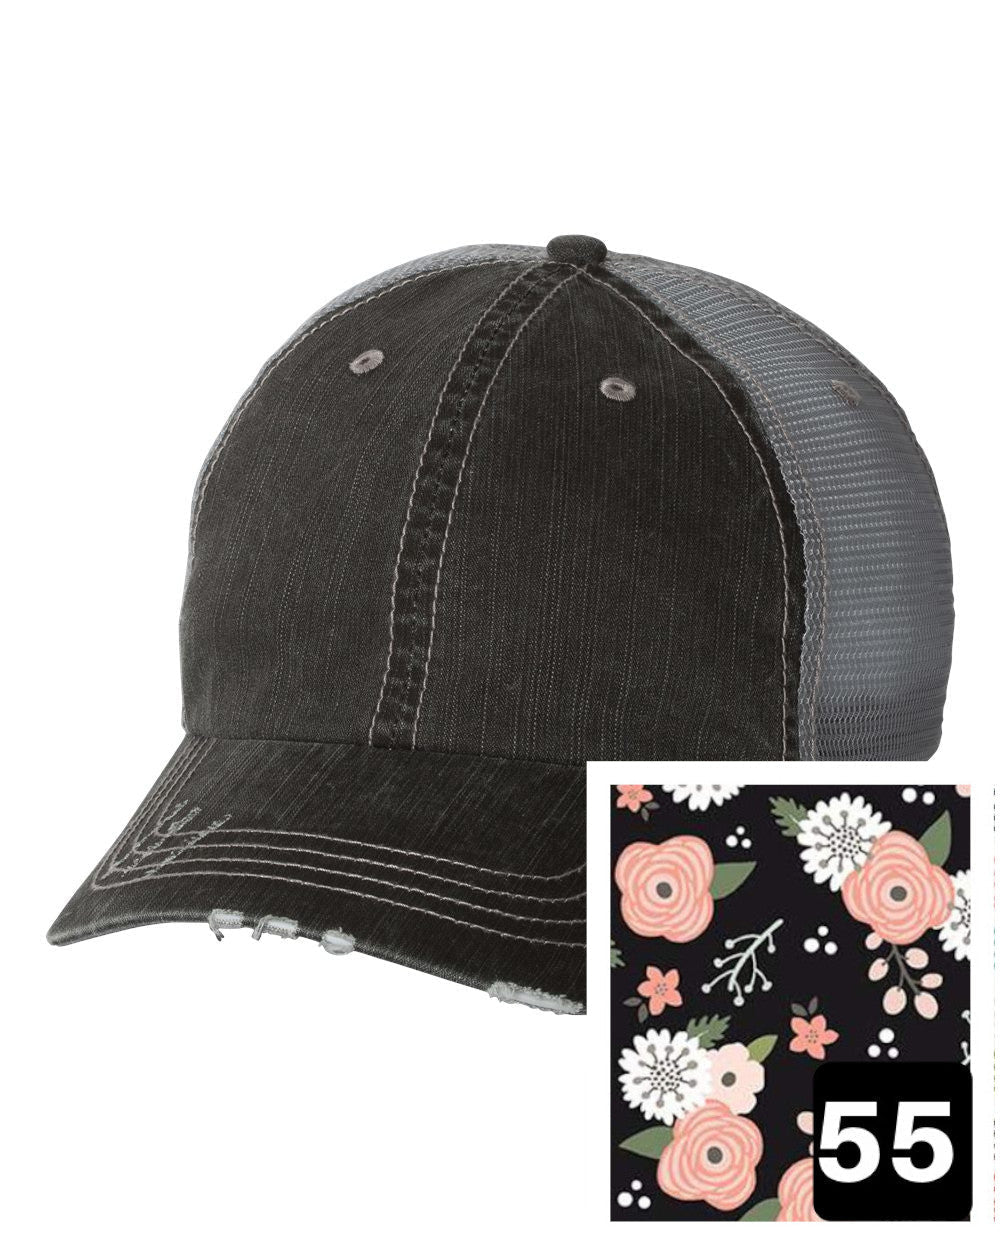 gray distressed trucker hat with petite floral on navy fabric state of Massachusetts